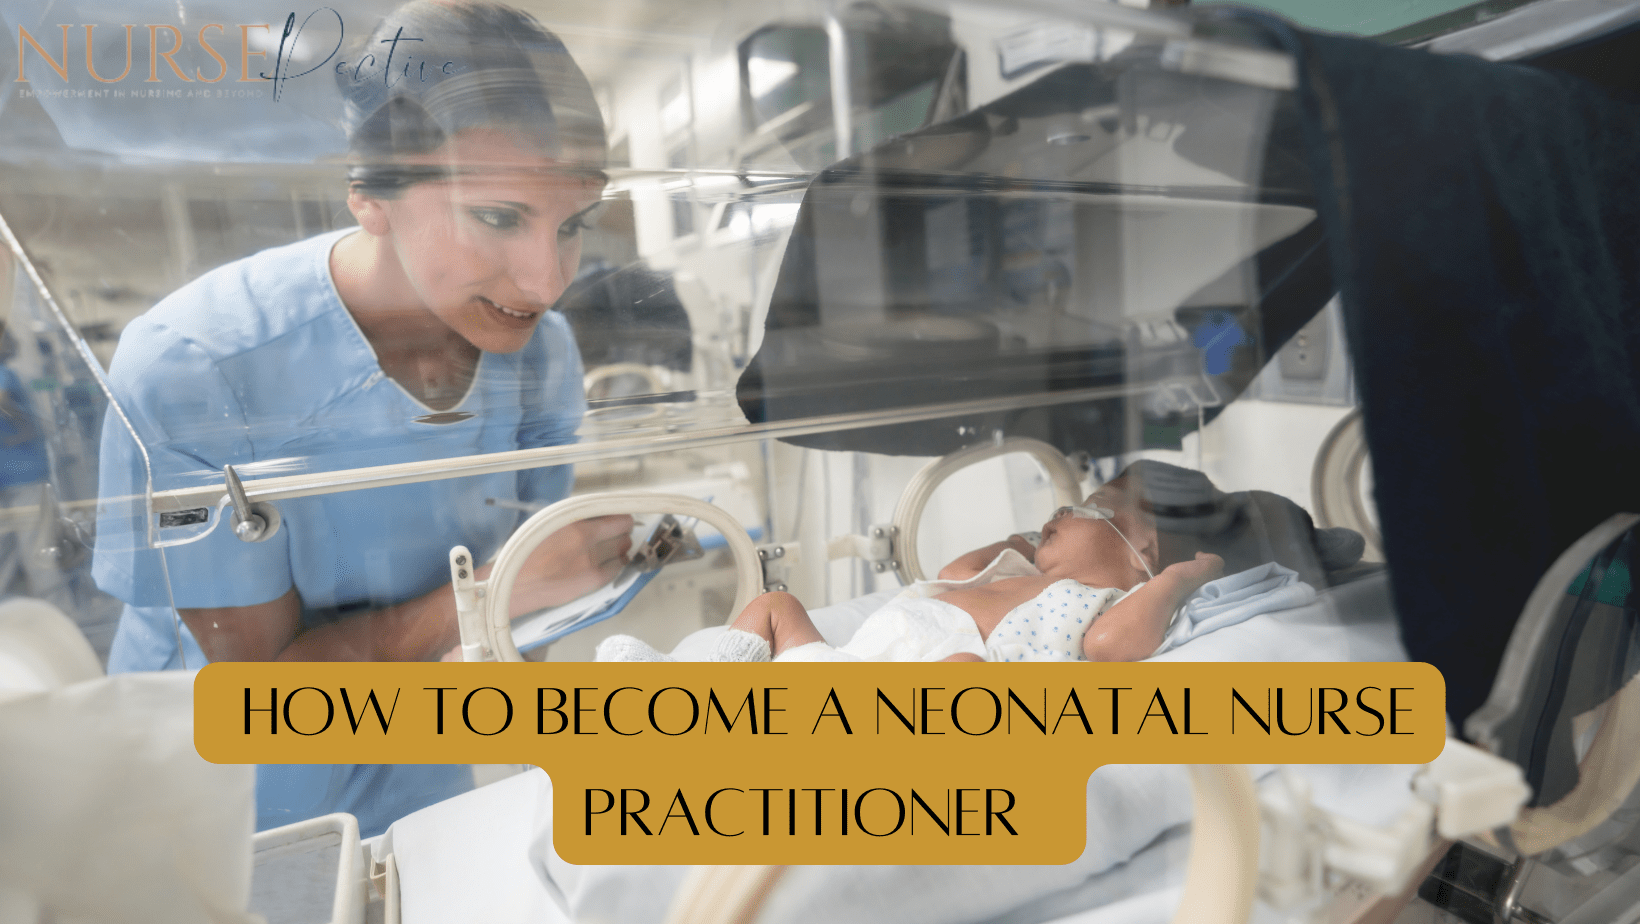 How to Become a Neonatal Nurse Practitioner?
